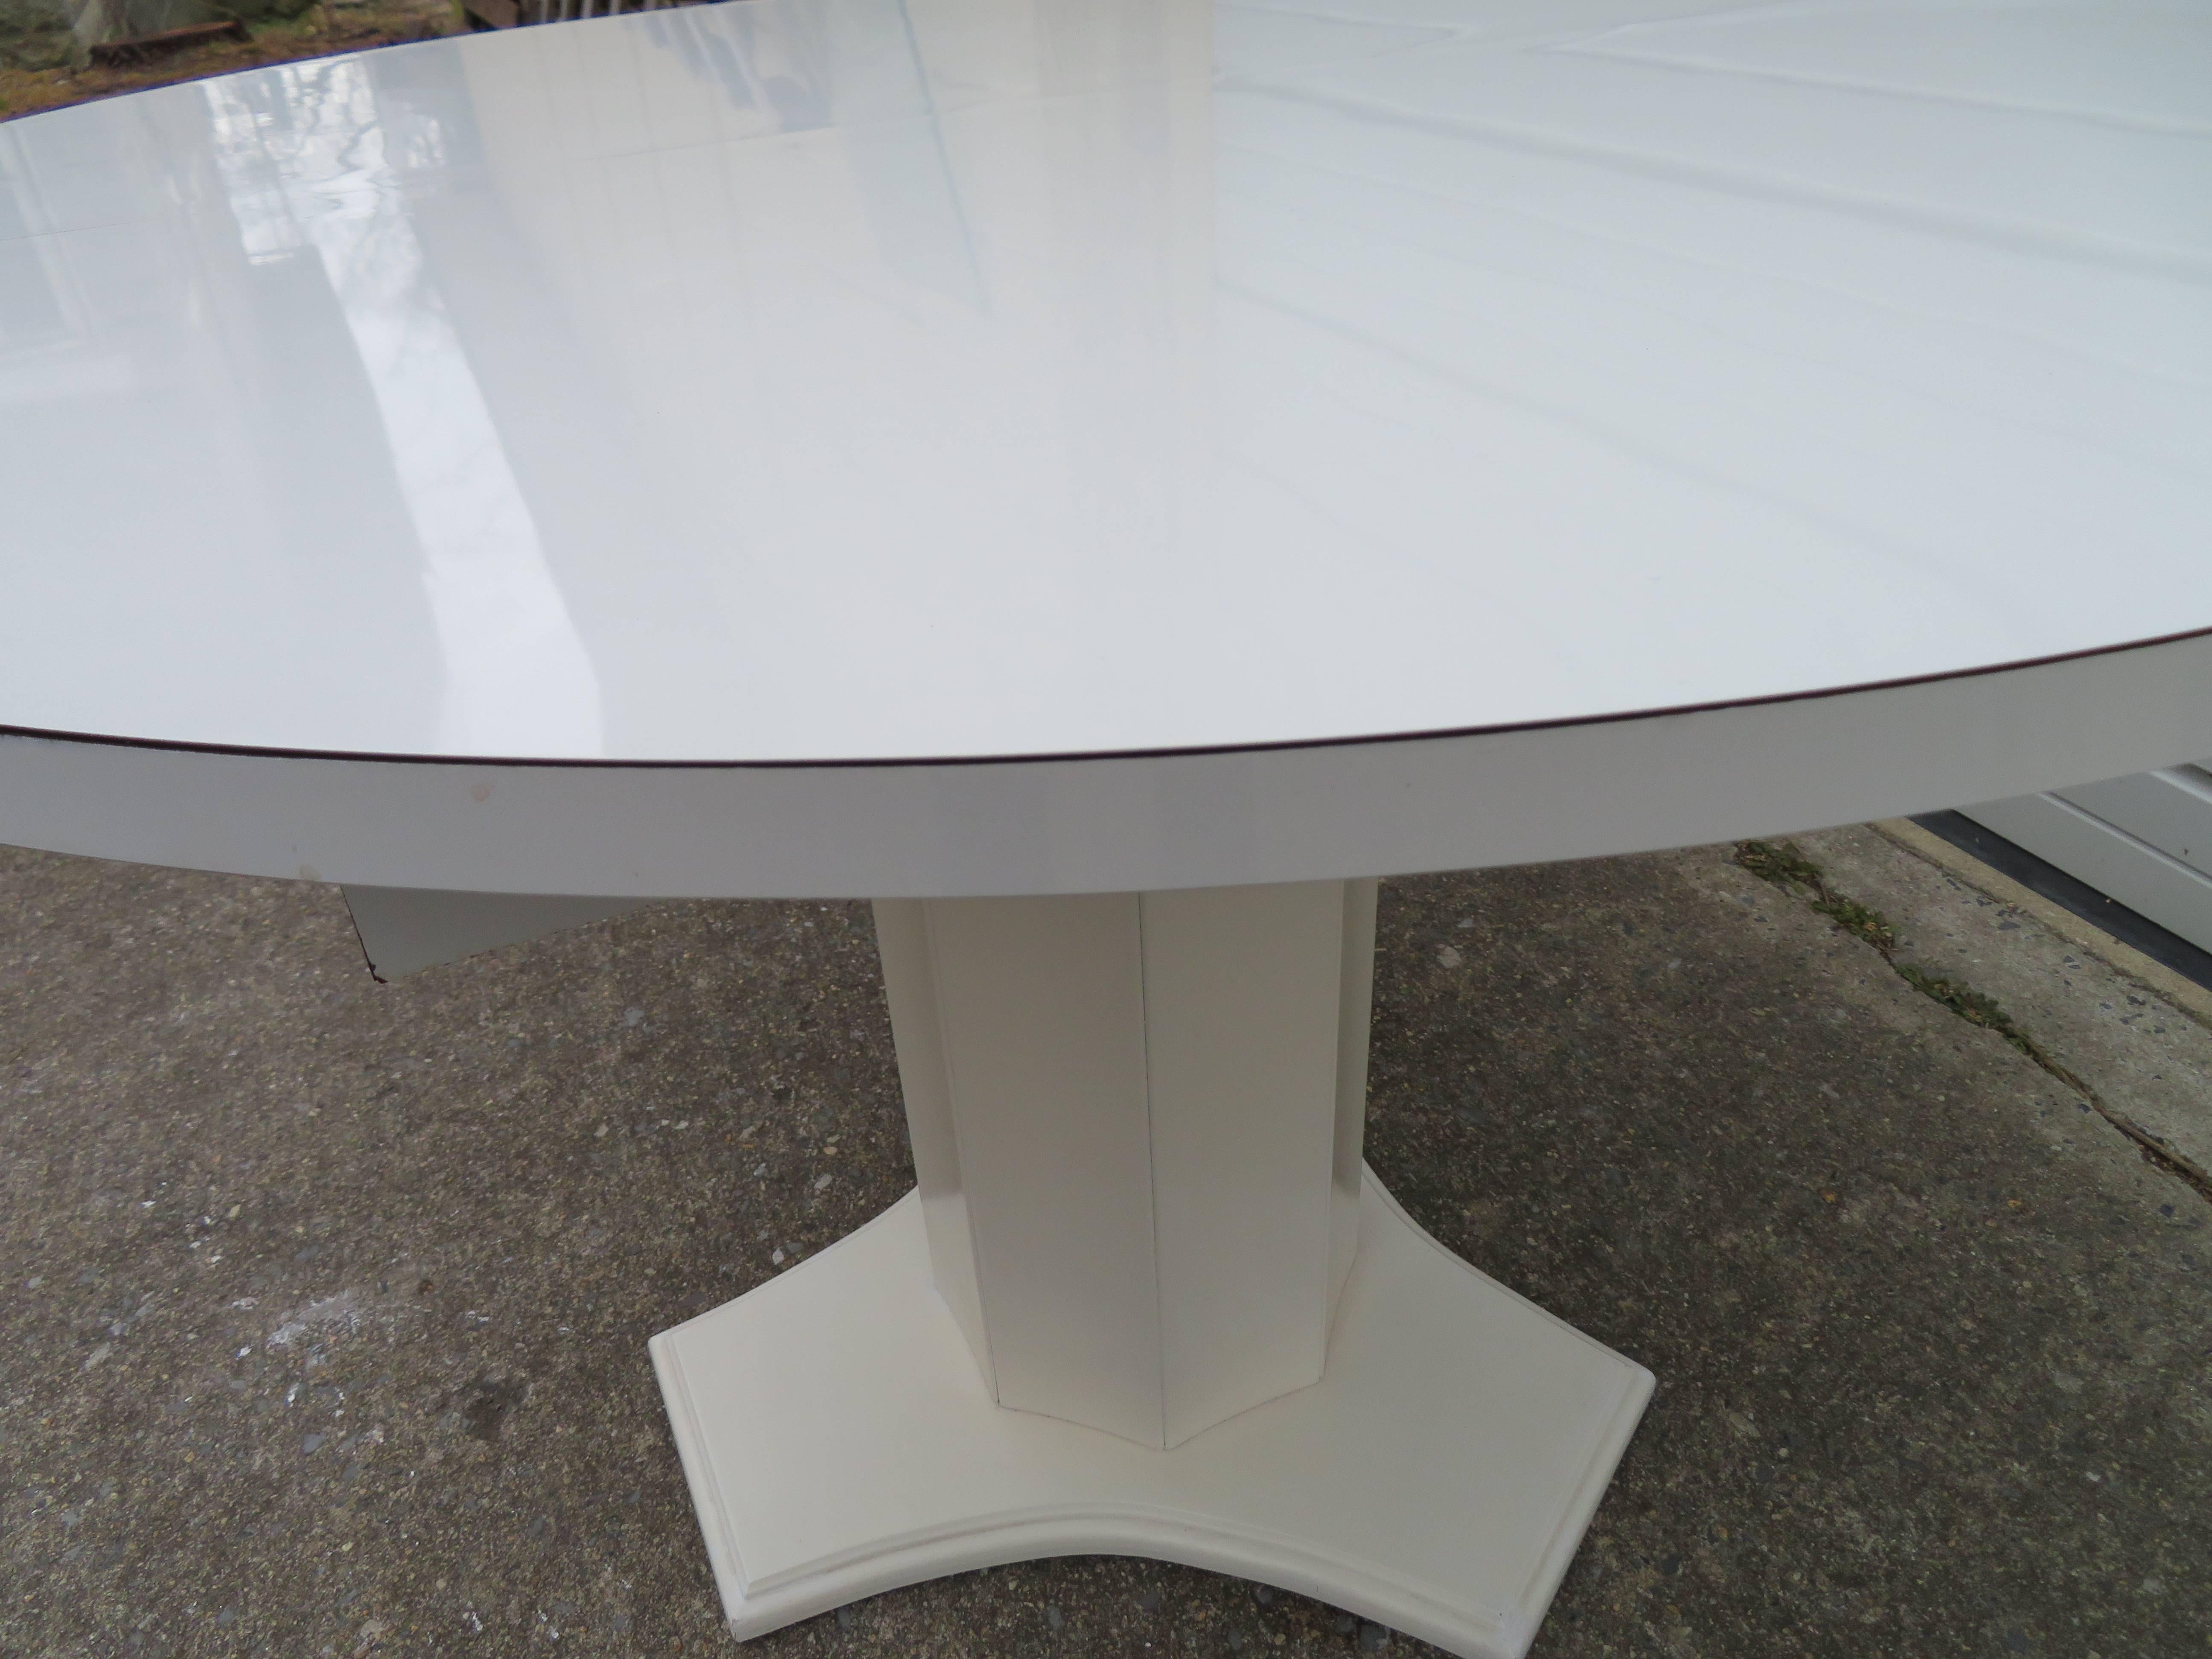 Lovely Hollywood Regency Round Dining Table In Good Condition For Sale In Pemberton, NJ